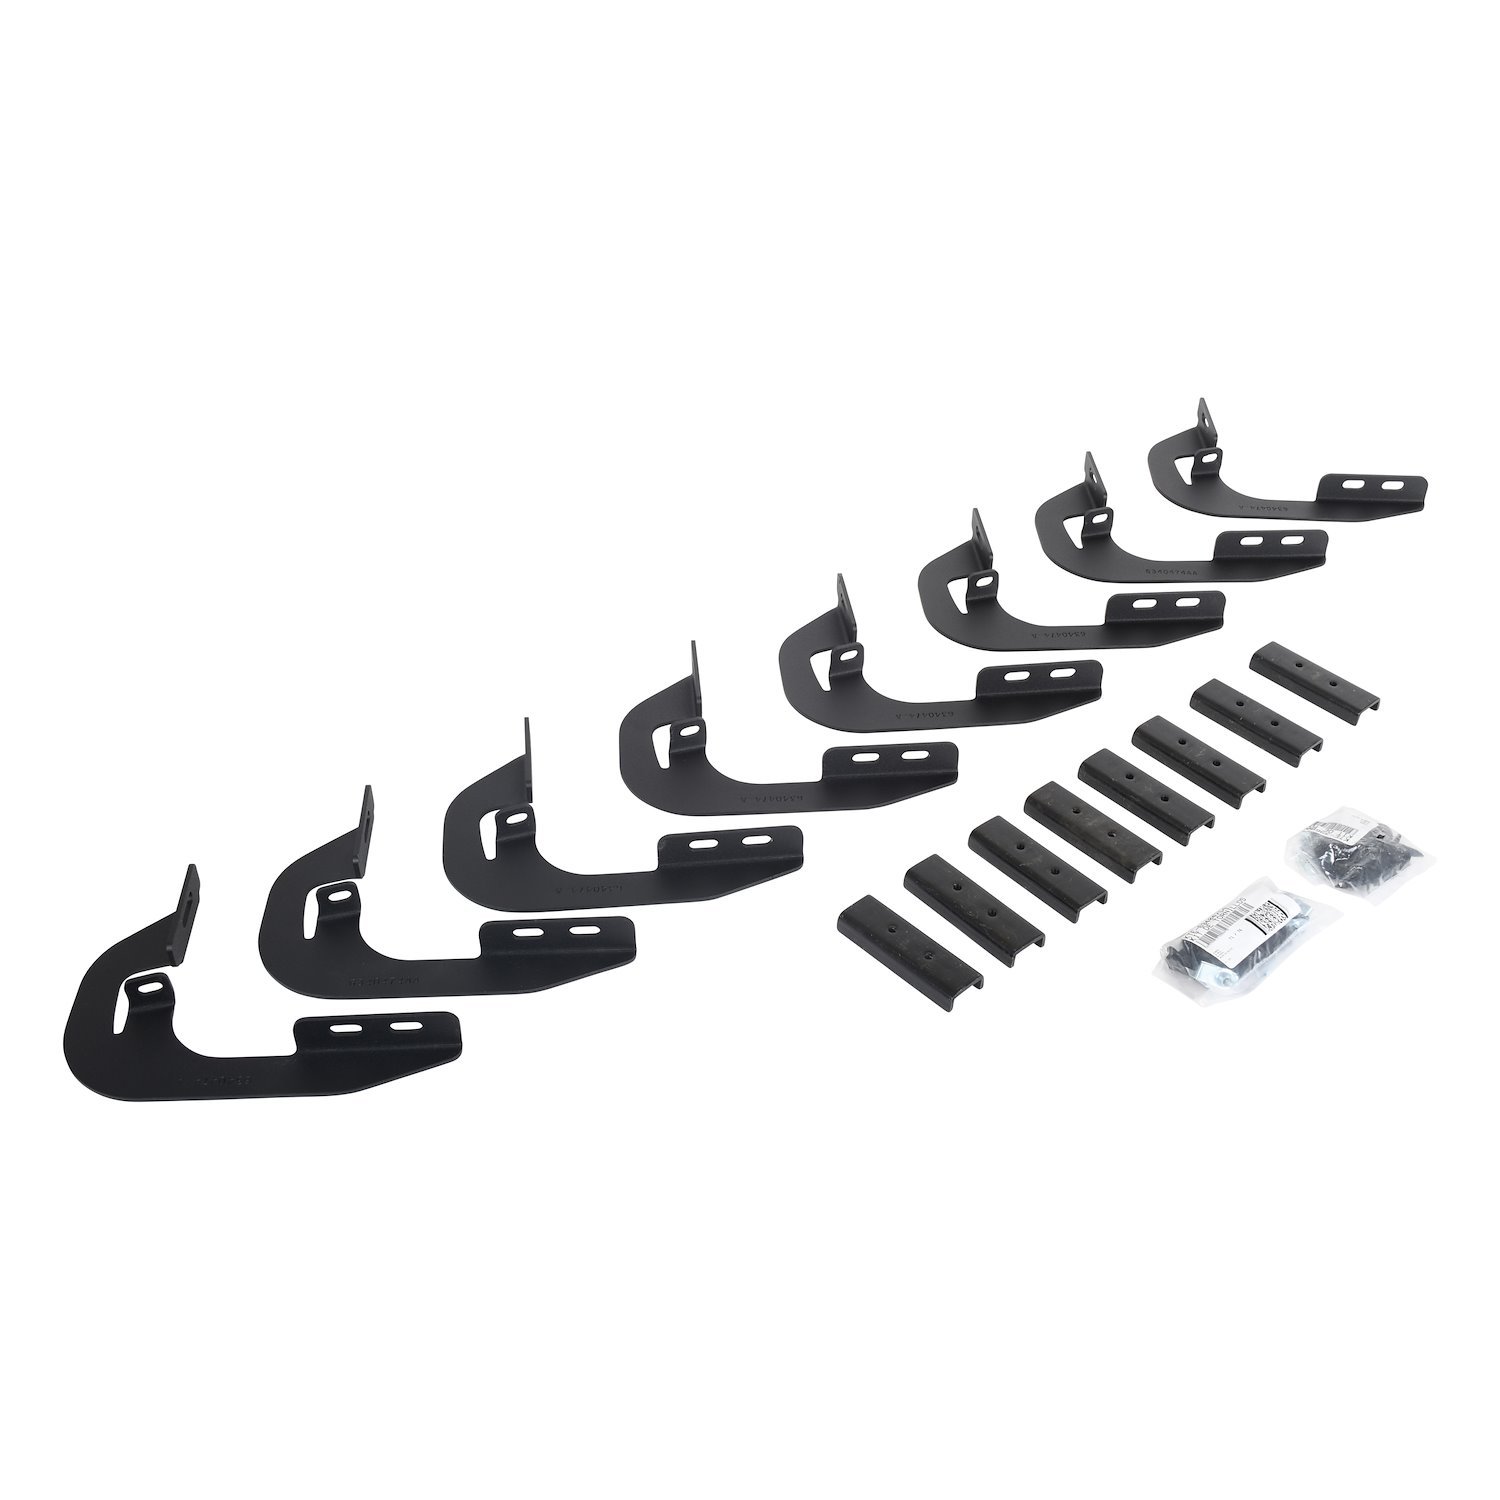 RB10/RB20 Running Board Mounting Brackets Fit Select 2014-2019